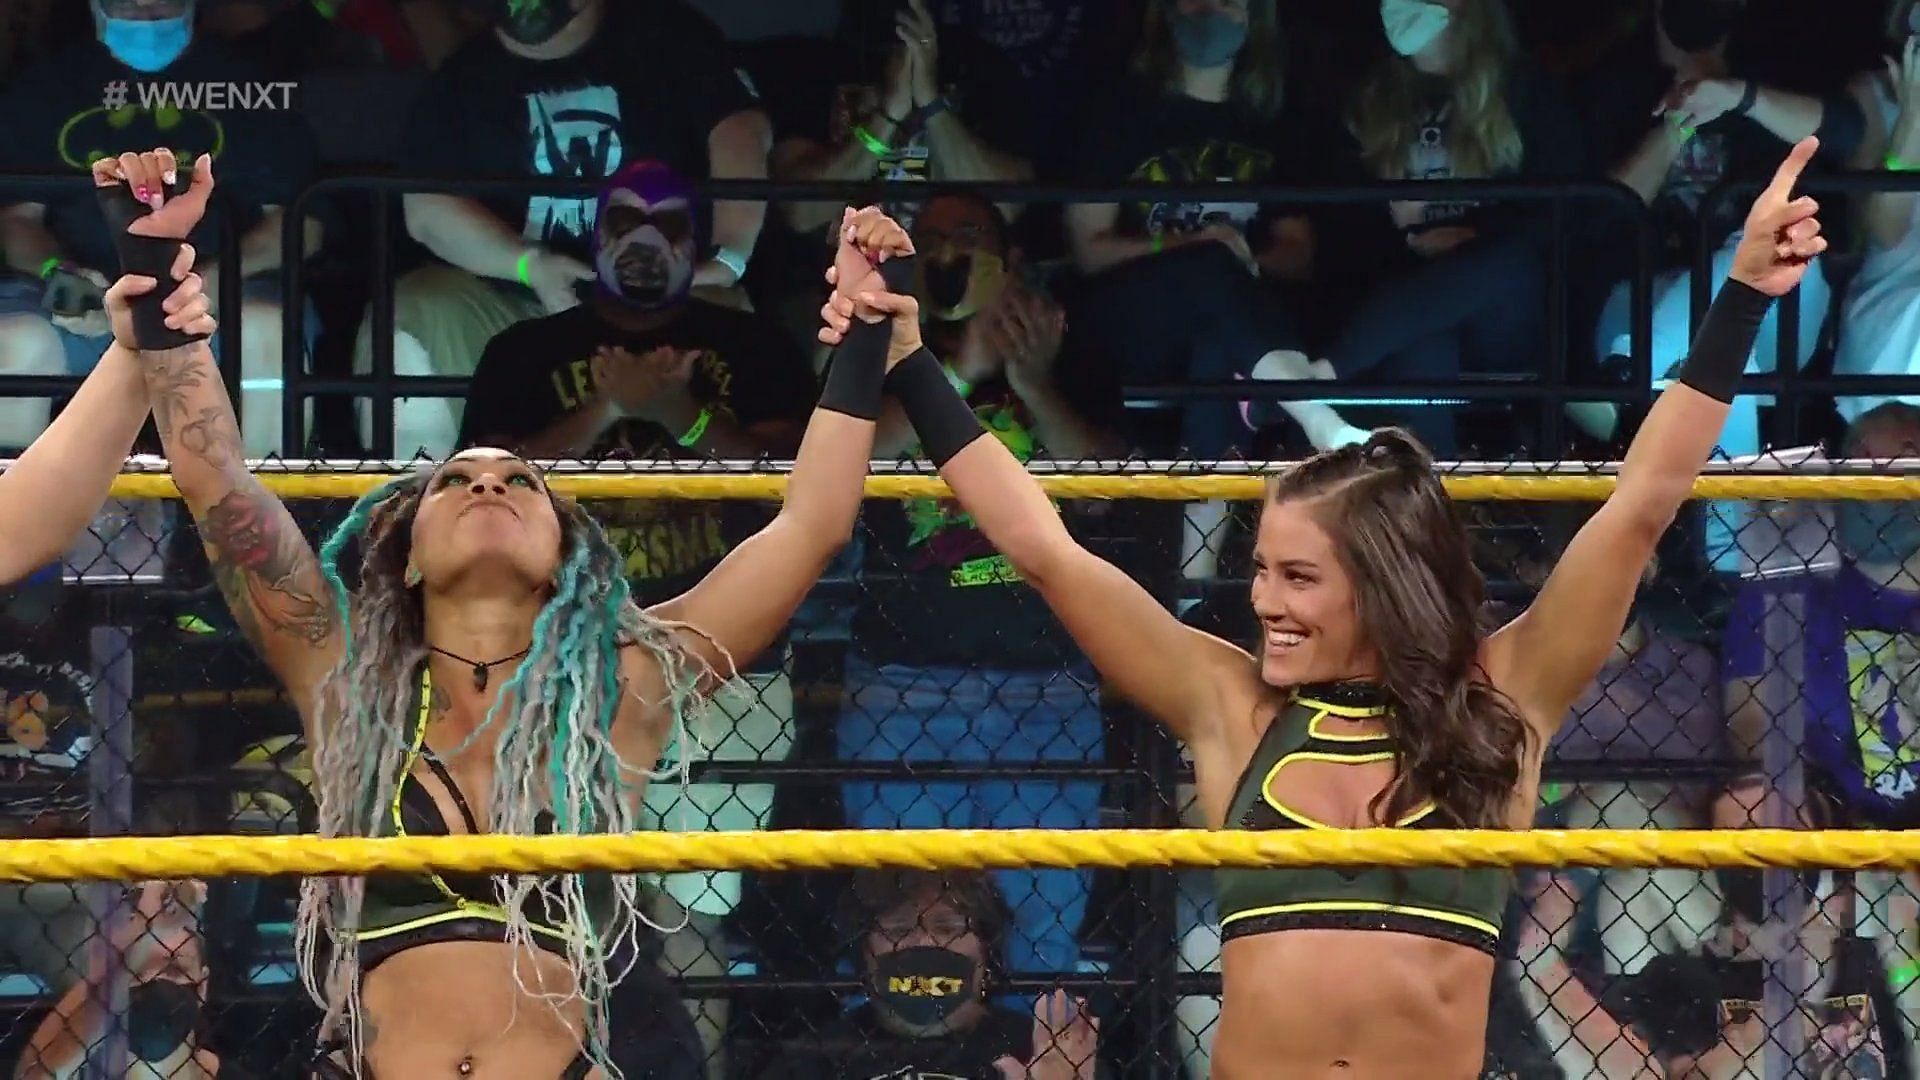 Katana Chance formerly known as Kacy Catanzaro with Lacey Lane on NXT